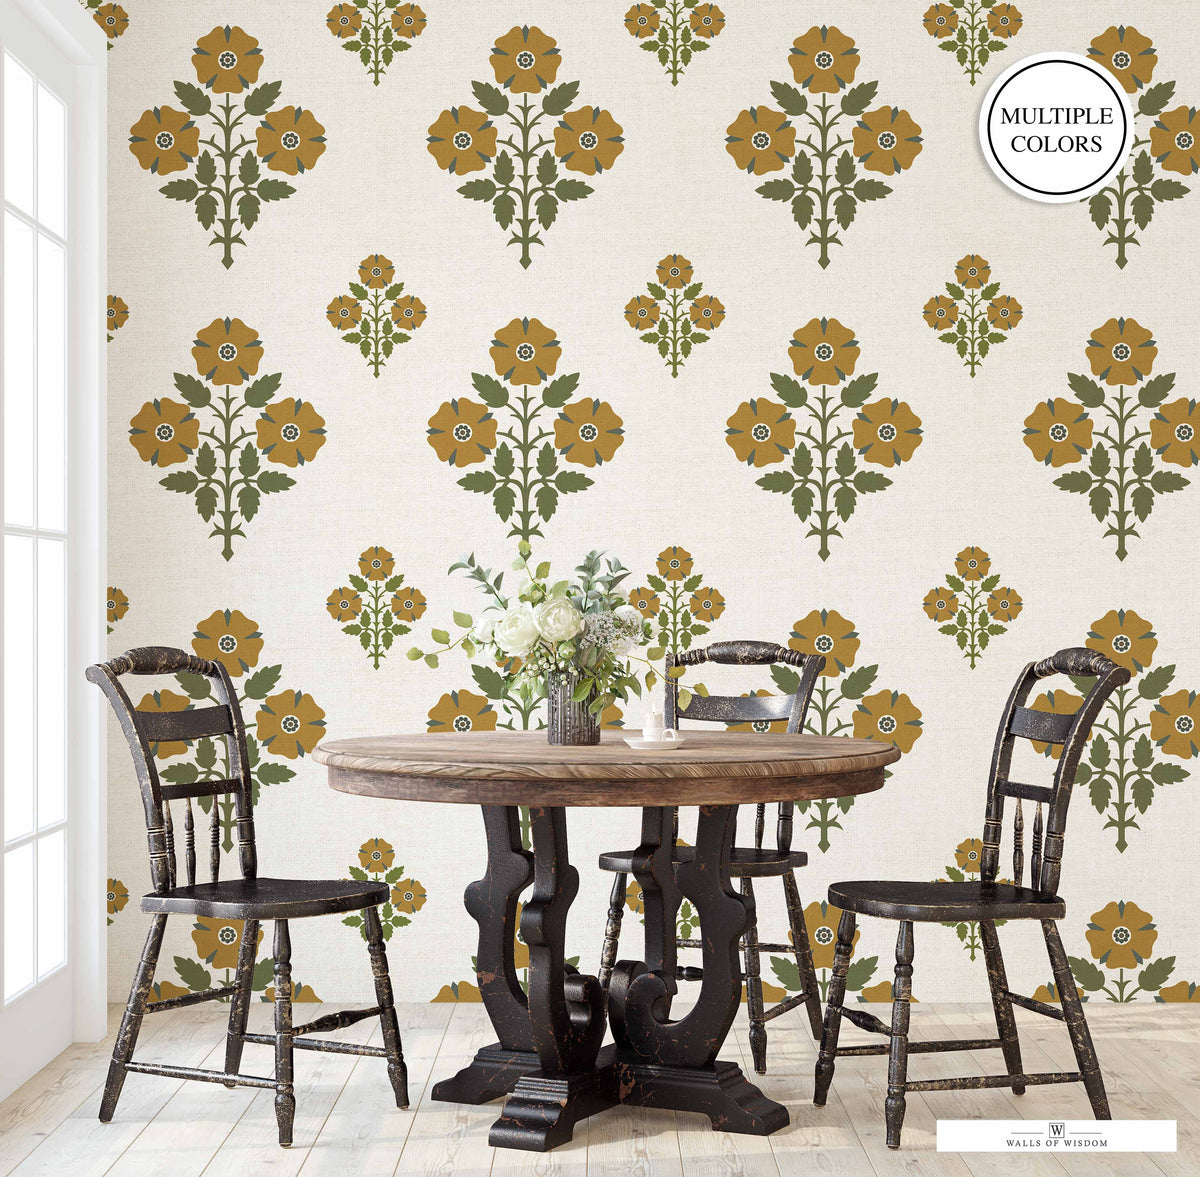 Sage Green and Mustard Yellow Modern Floral Wallpaper in a faux grasscloth texture, perfect for living room decor